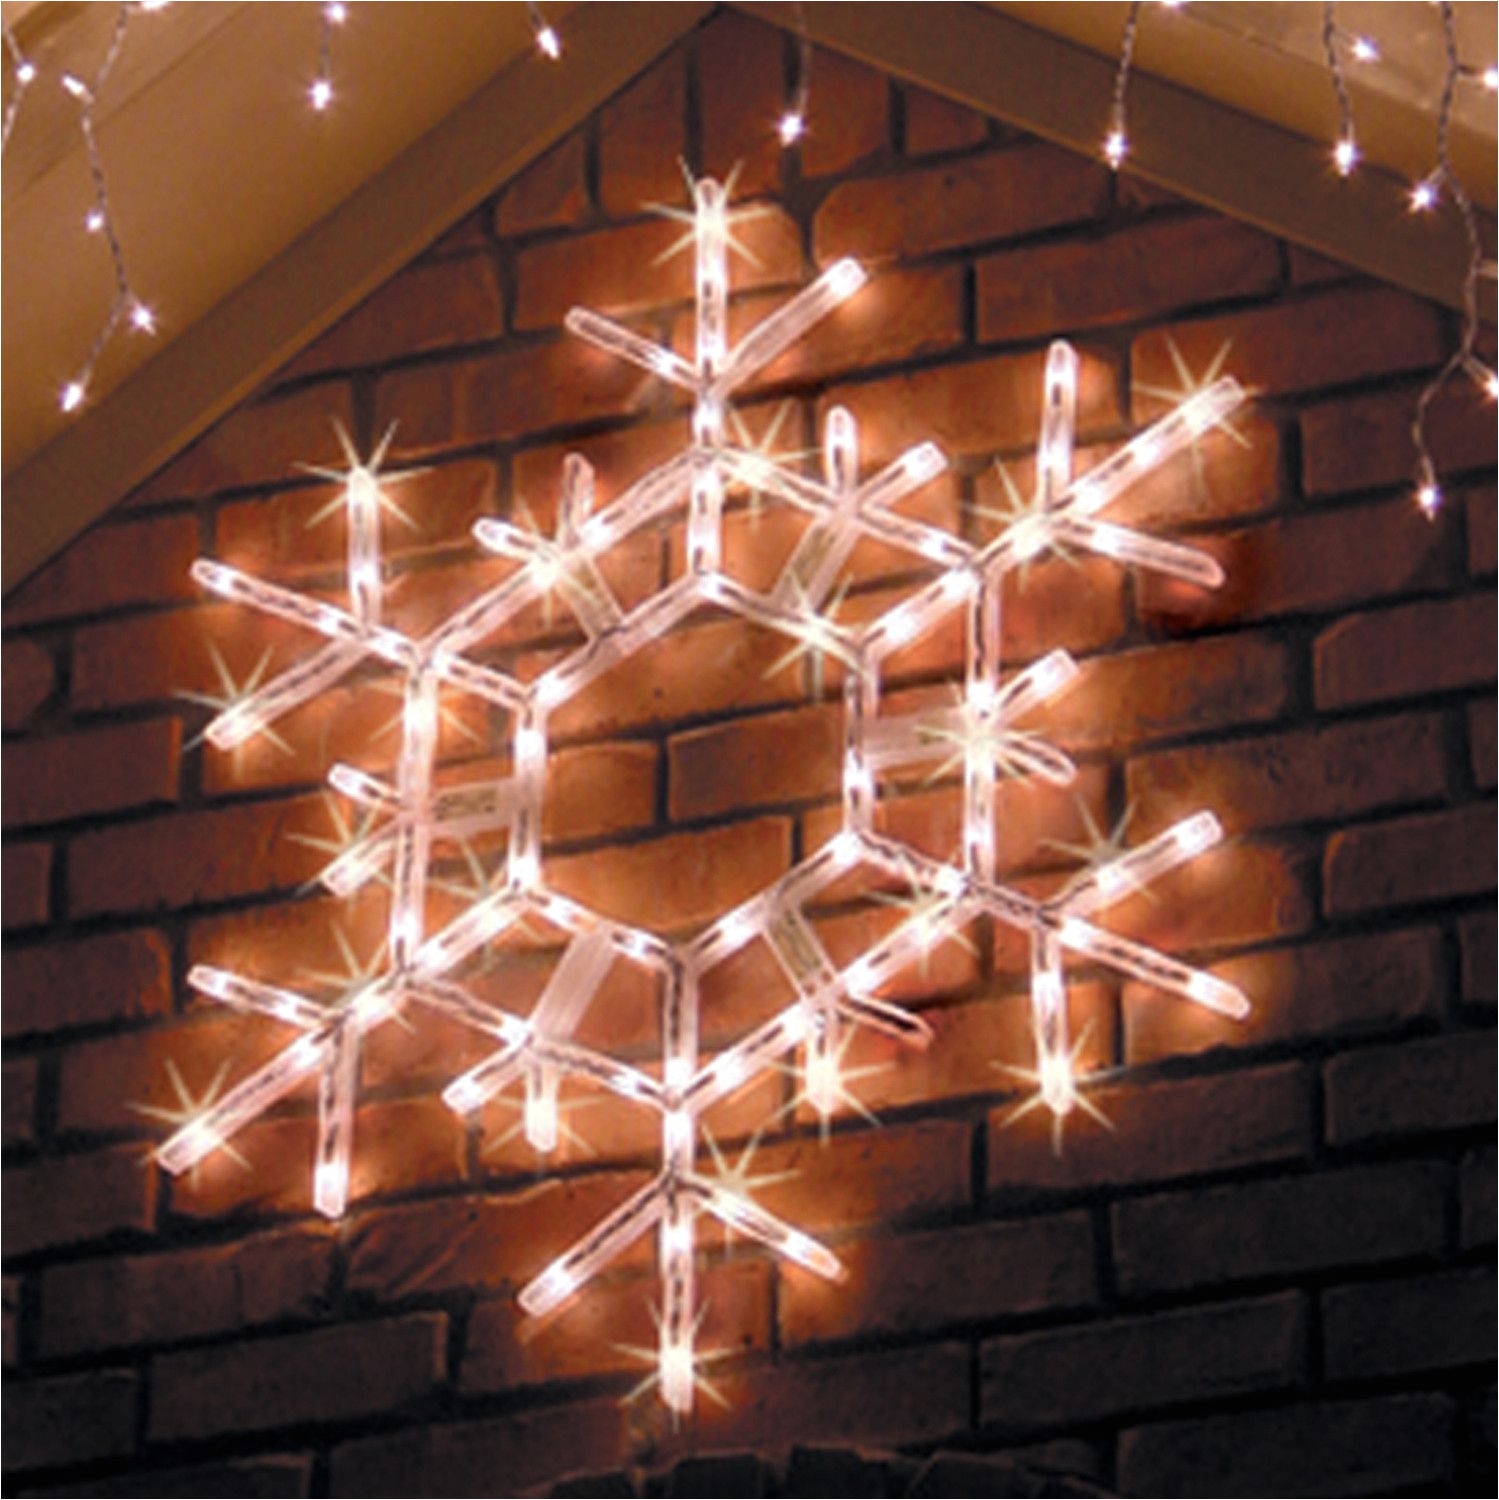 lighted outdoor silhouettes motifs http www christmaslightsetc com yard decorations htm